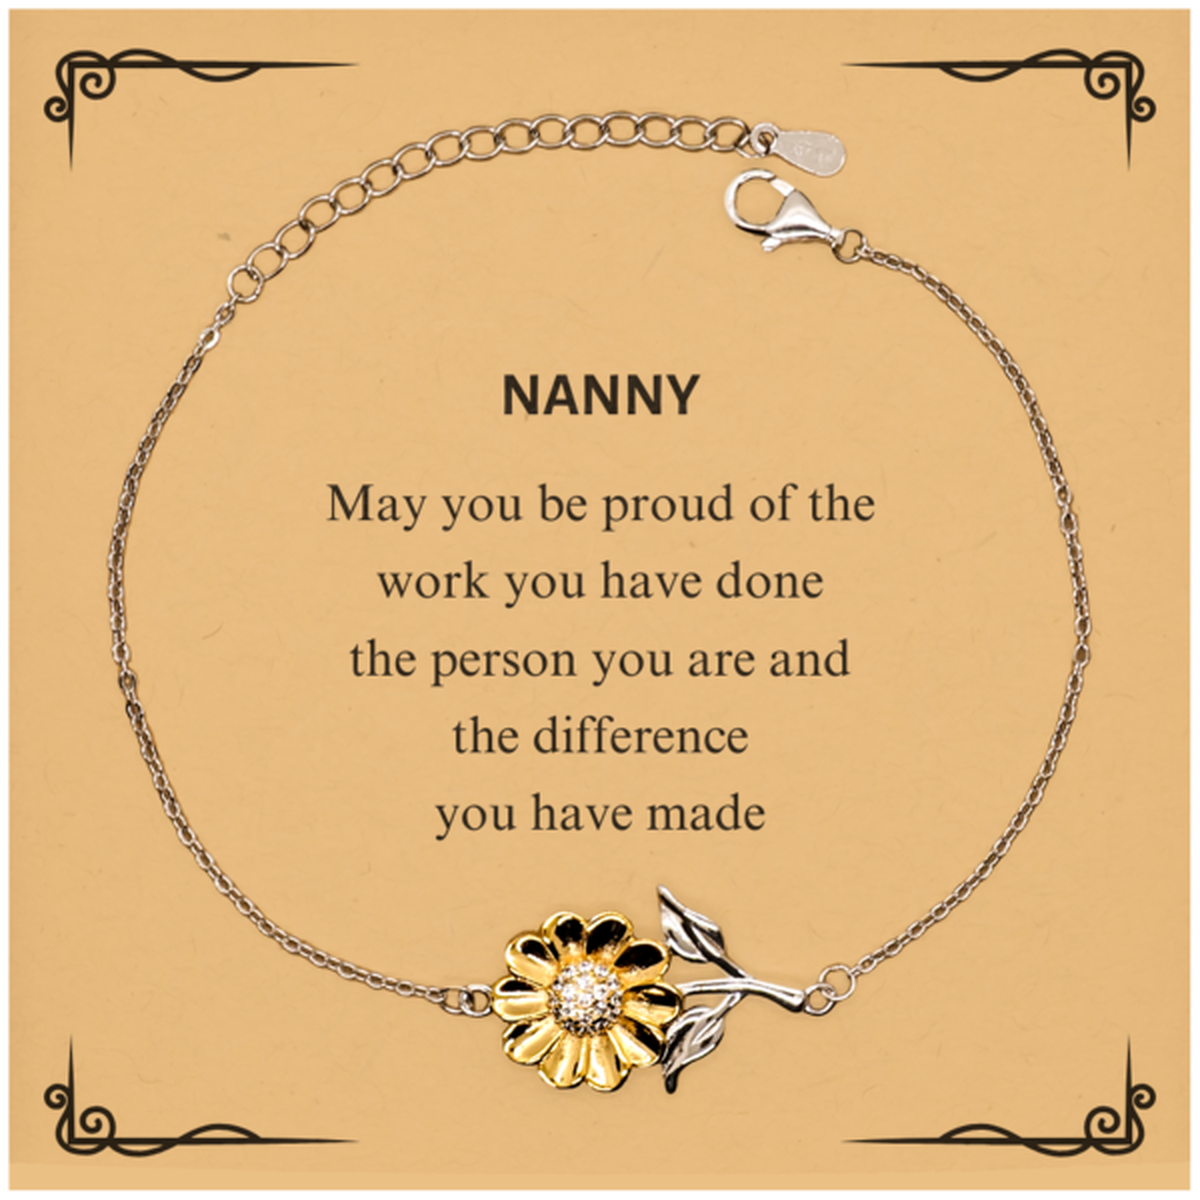 Nanny May you be proud of the work you have done, Retirement Nanny Sunflower Bracelet for Colleague Appreciation Gifts Amazing for Nanny